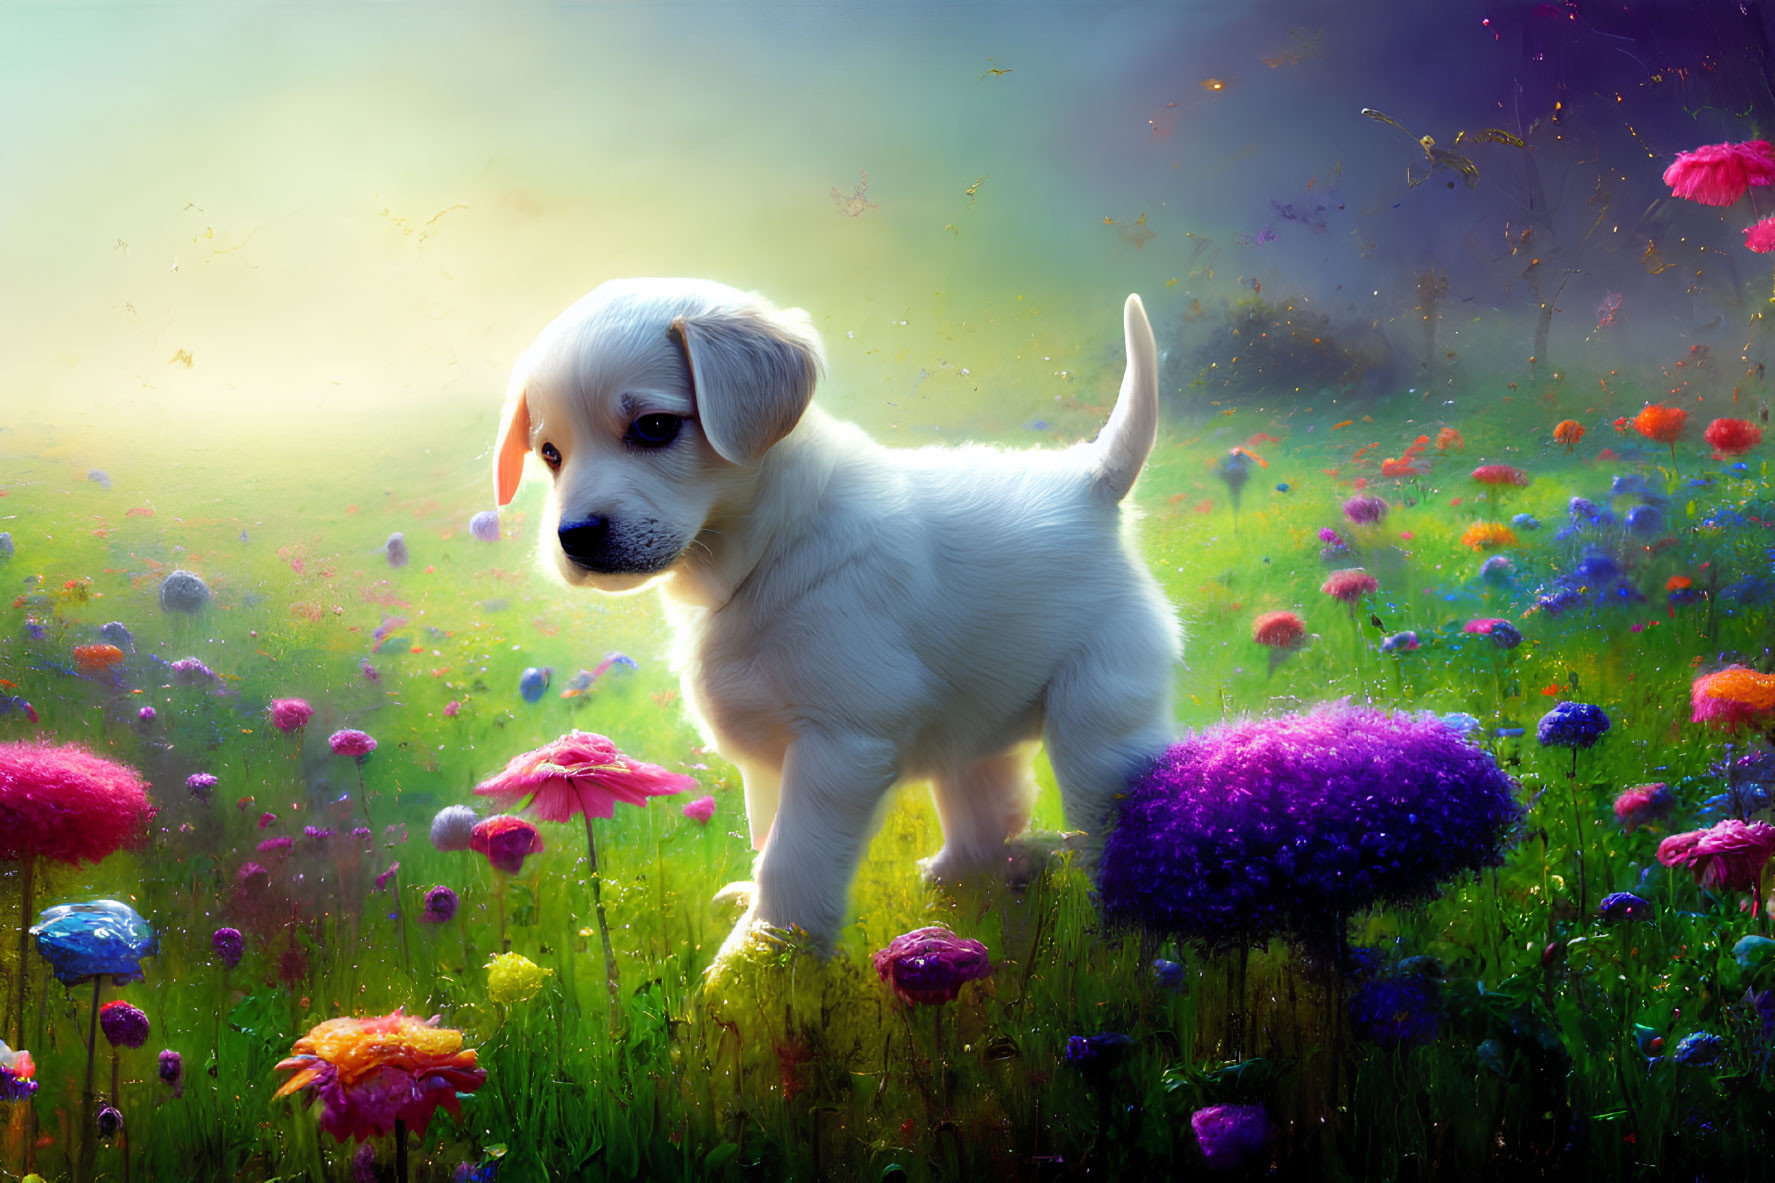 Playful puppy in vibrant meadow with colorful flowers and dreamy sky